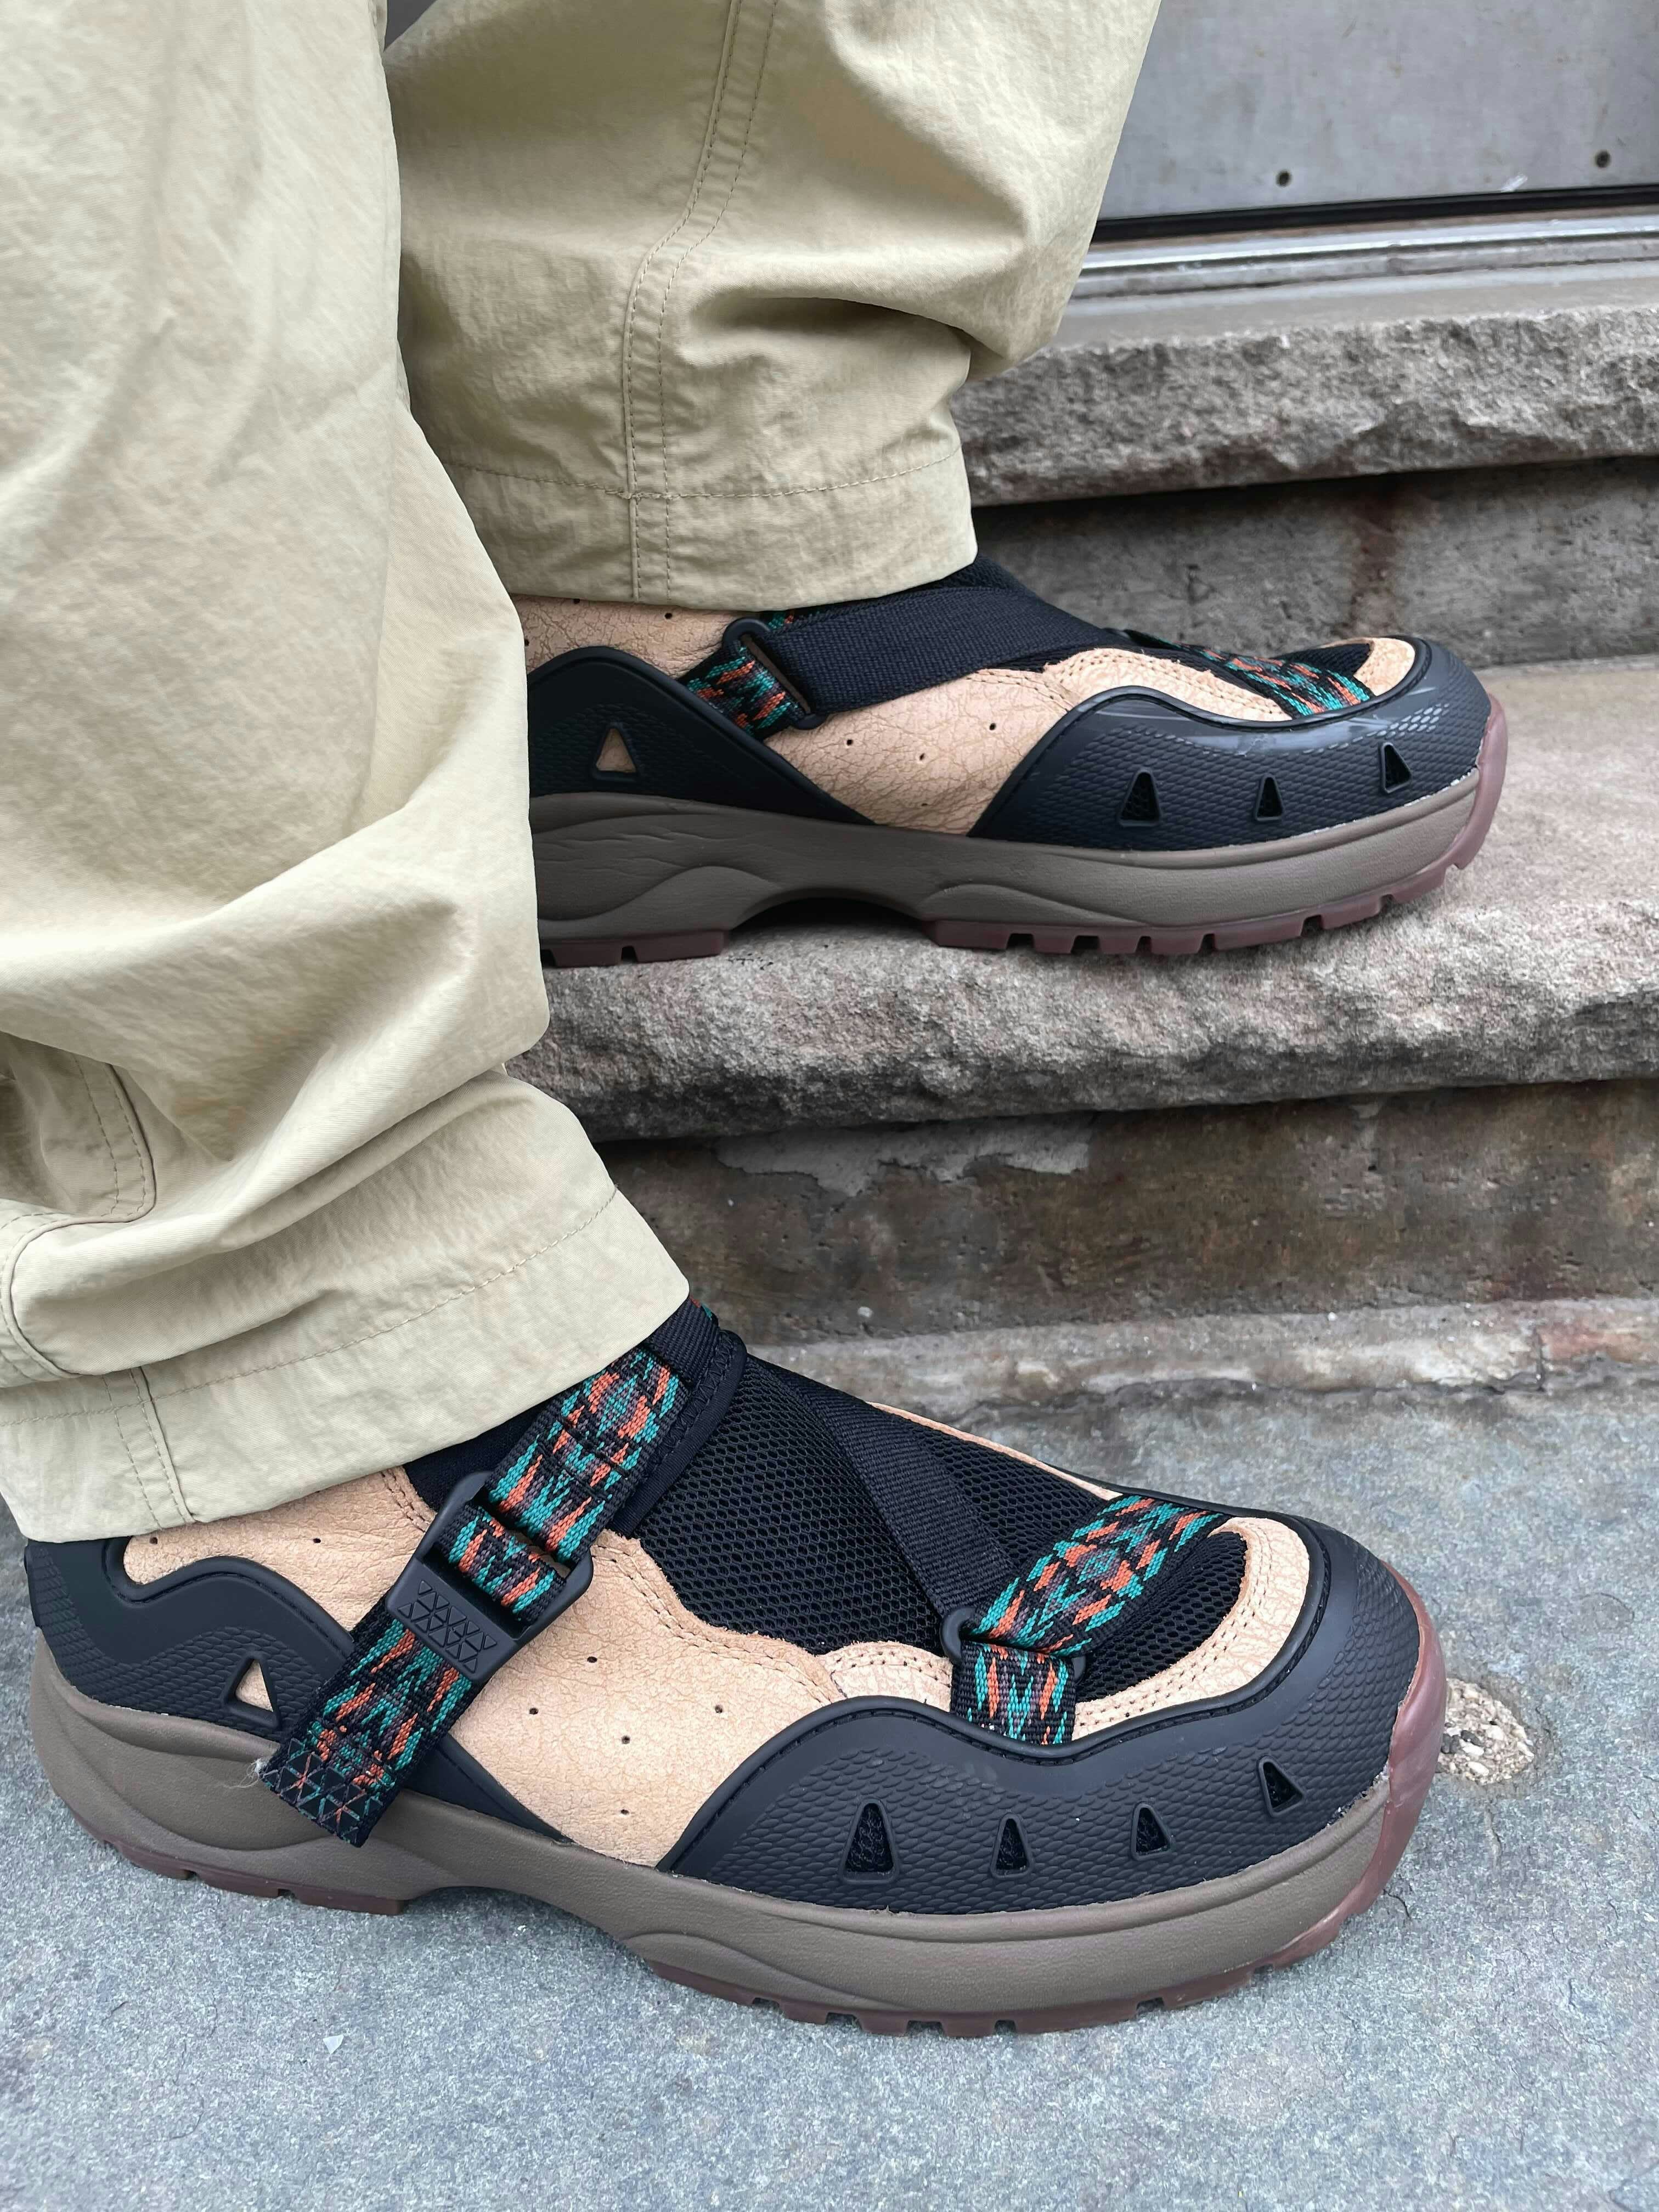 Wearing Teva's Revive '94 Mid: An amazing boot-meets-sandal